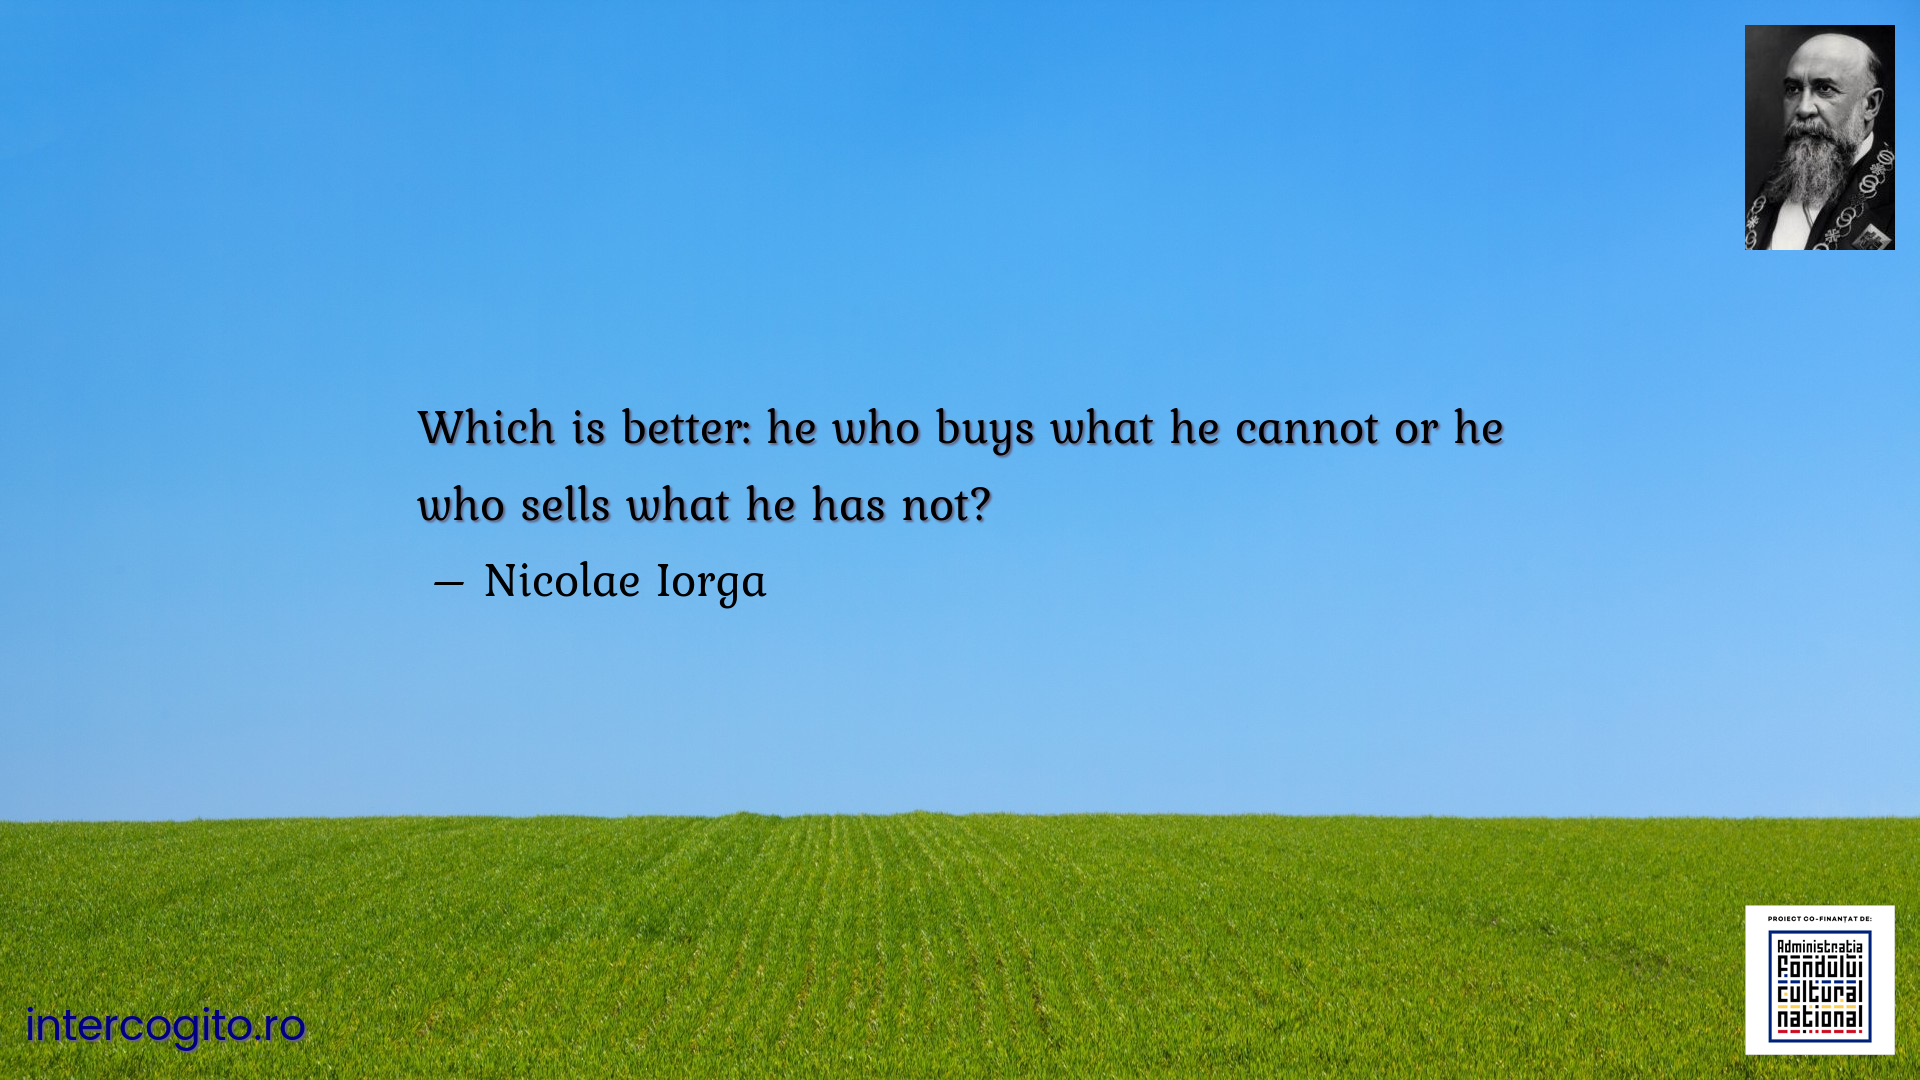 Which is better: he who buys what he cannot or he who sells what he has not?